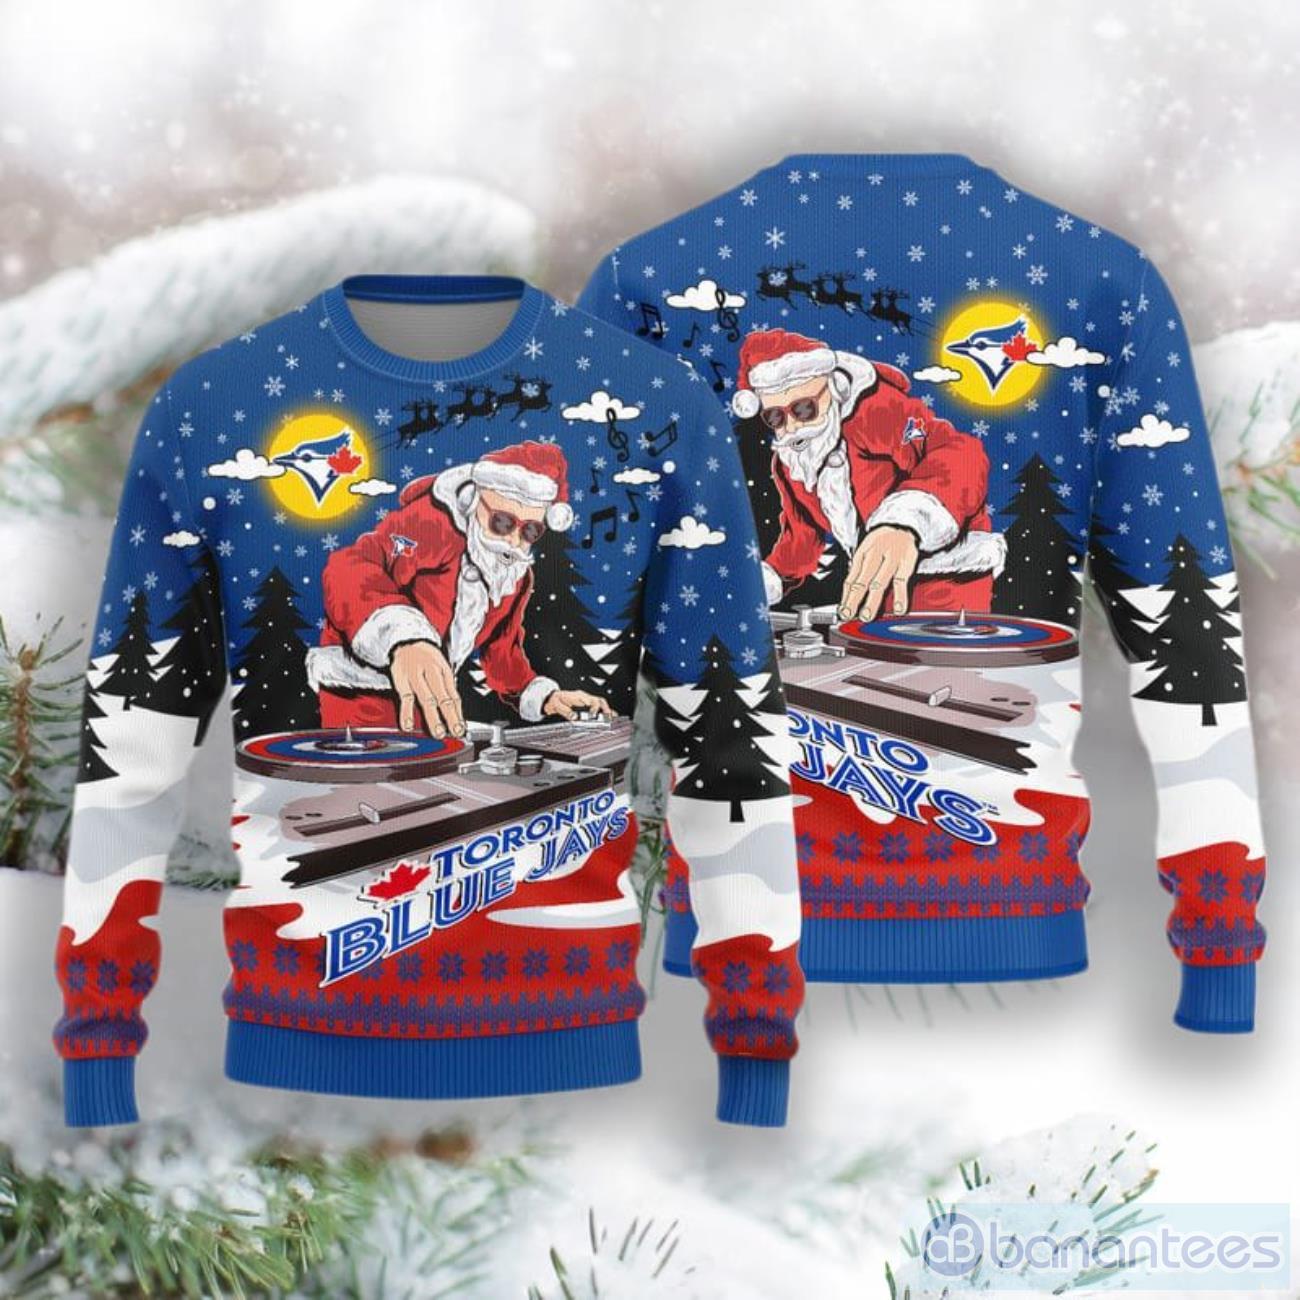 Funny Team Logo Toronto Blue Jay Christmas Tree Gifts For Fans Ugly  Christmas Sweater Gift Holidays - Banantees